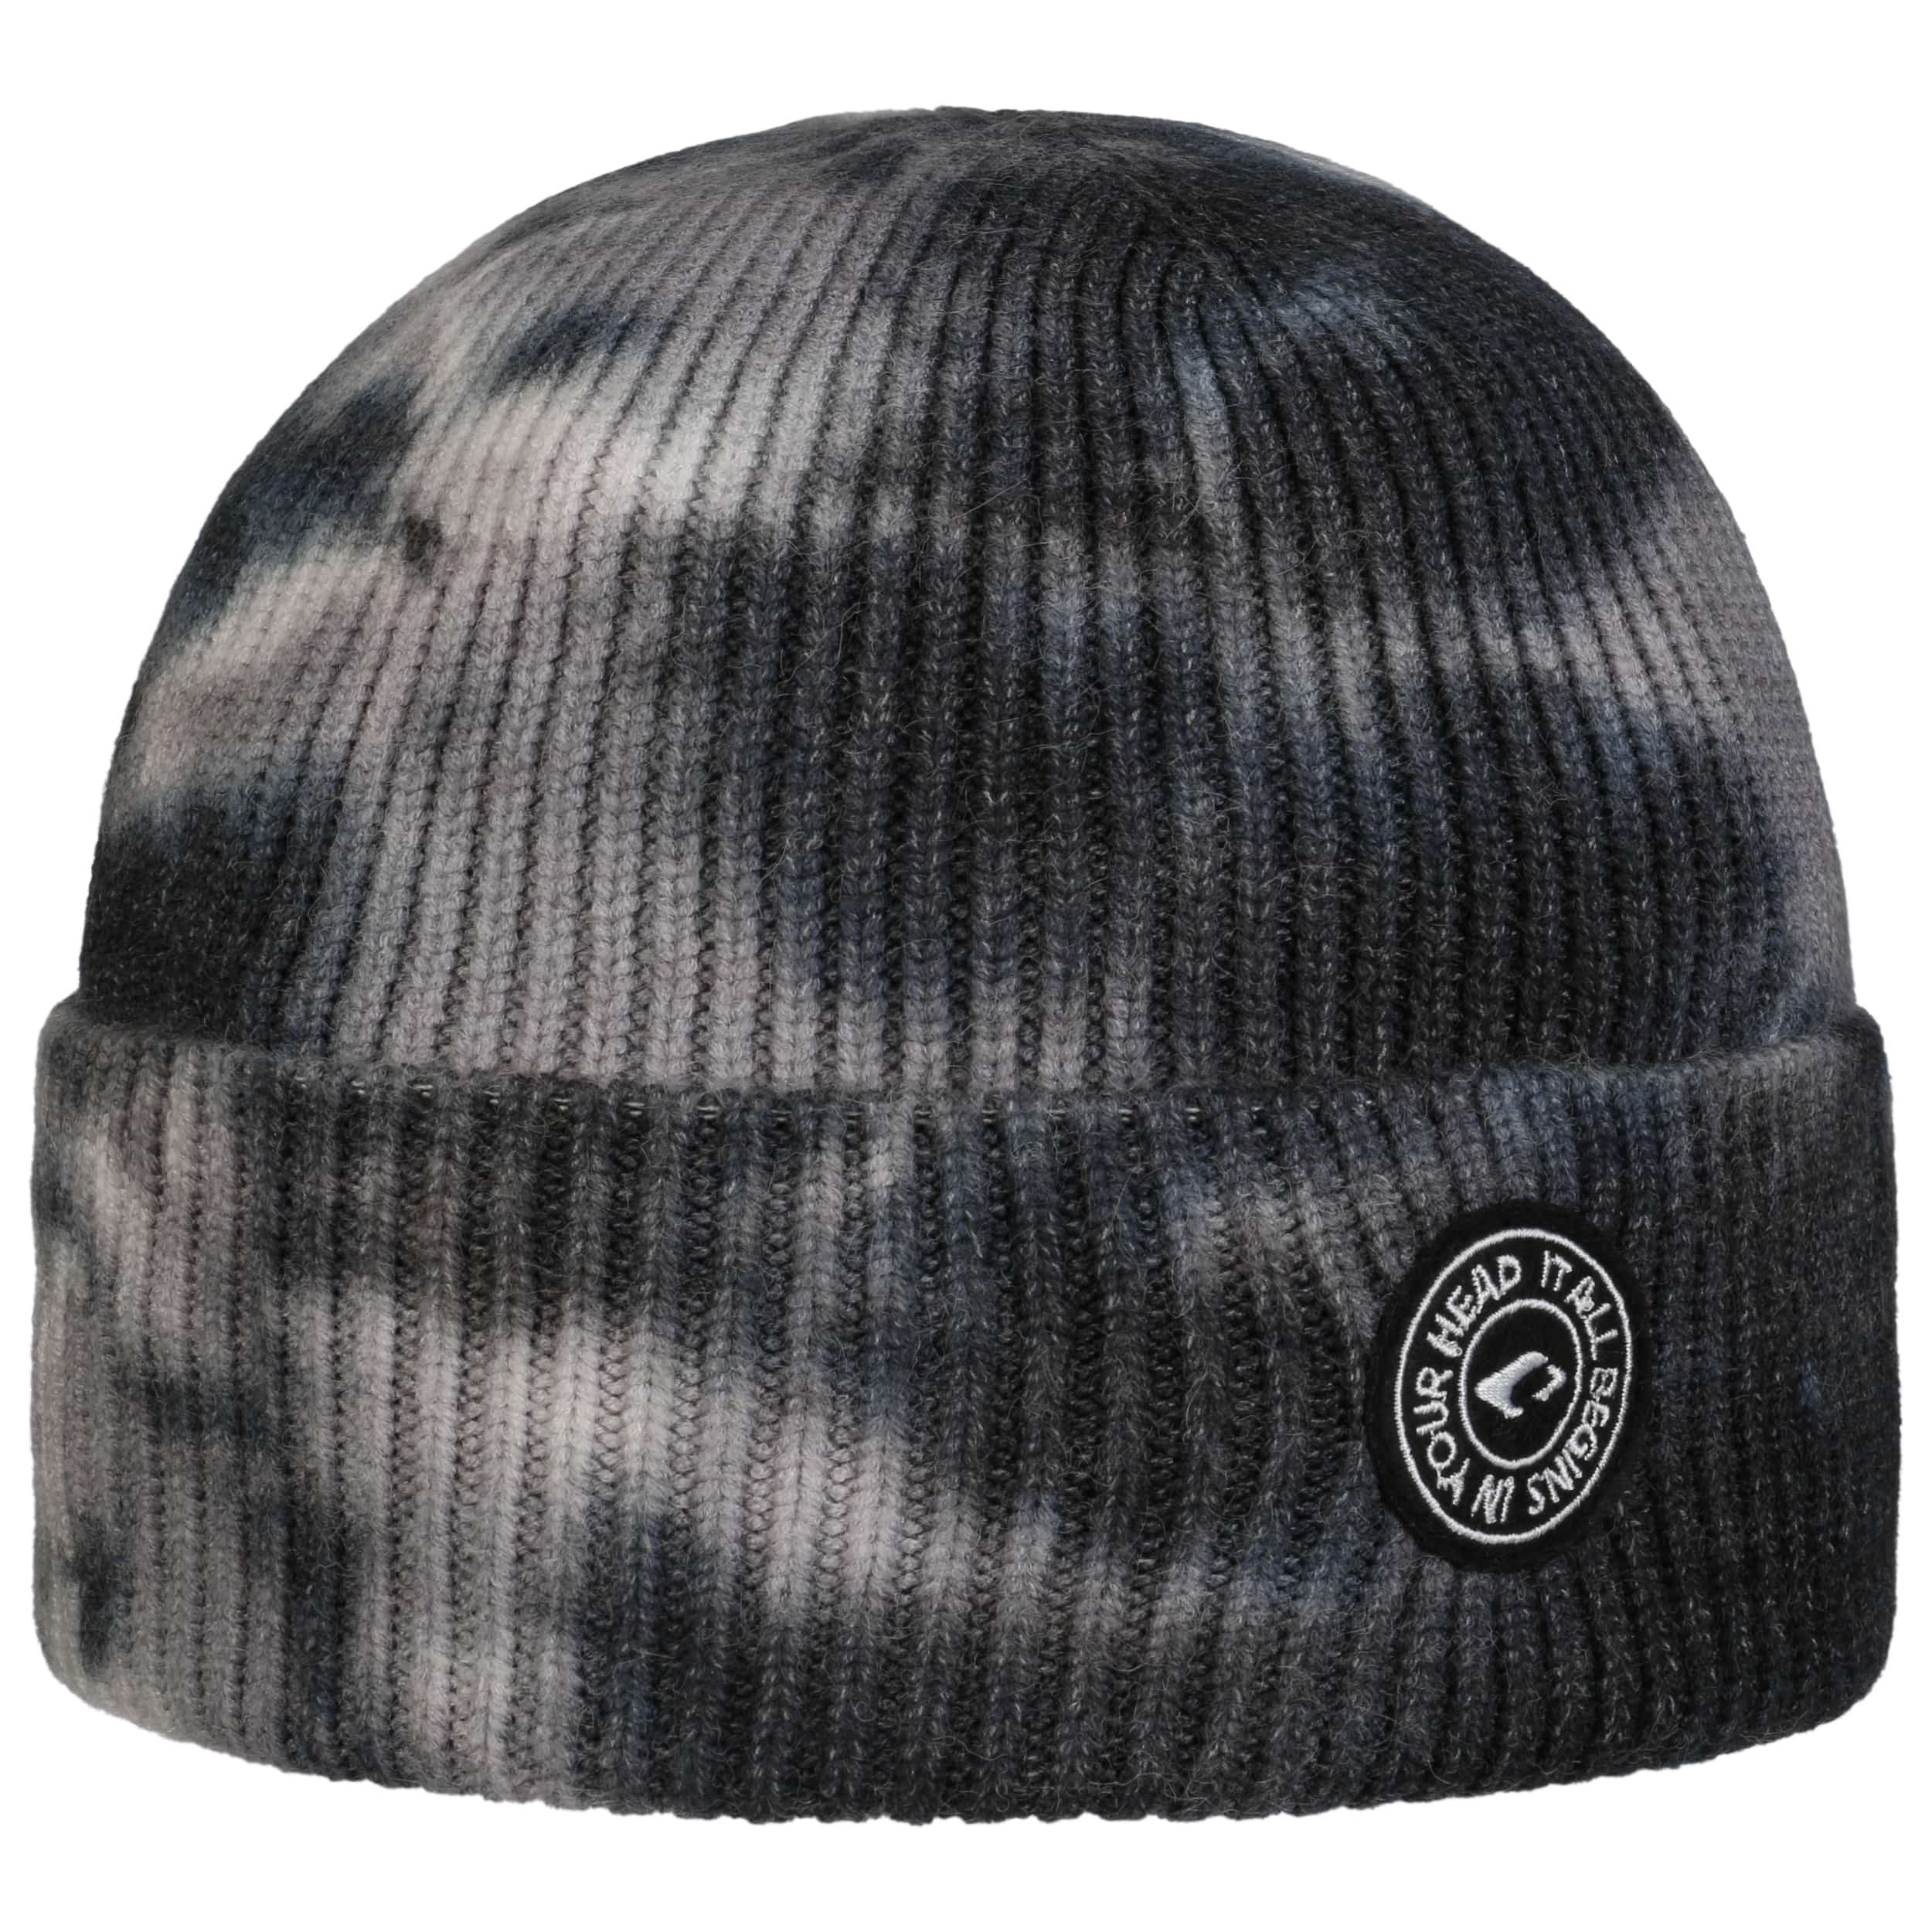 Yuna Tie Dye Beanie Hat by Chillouts - 28,95 €